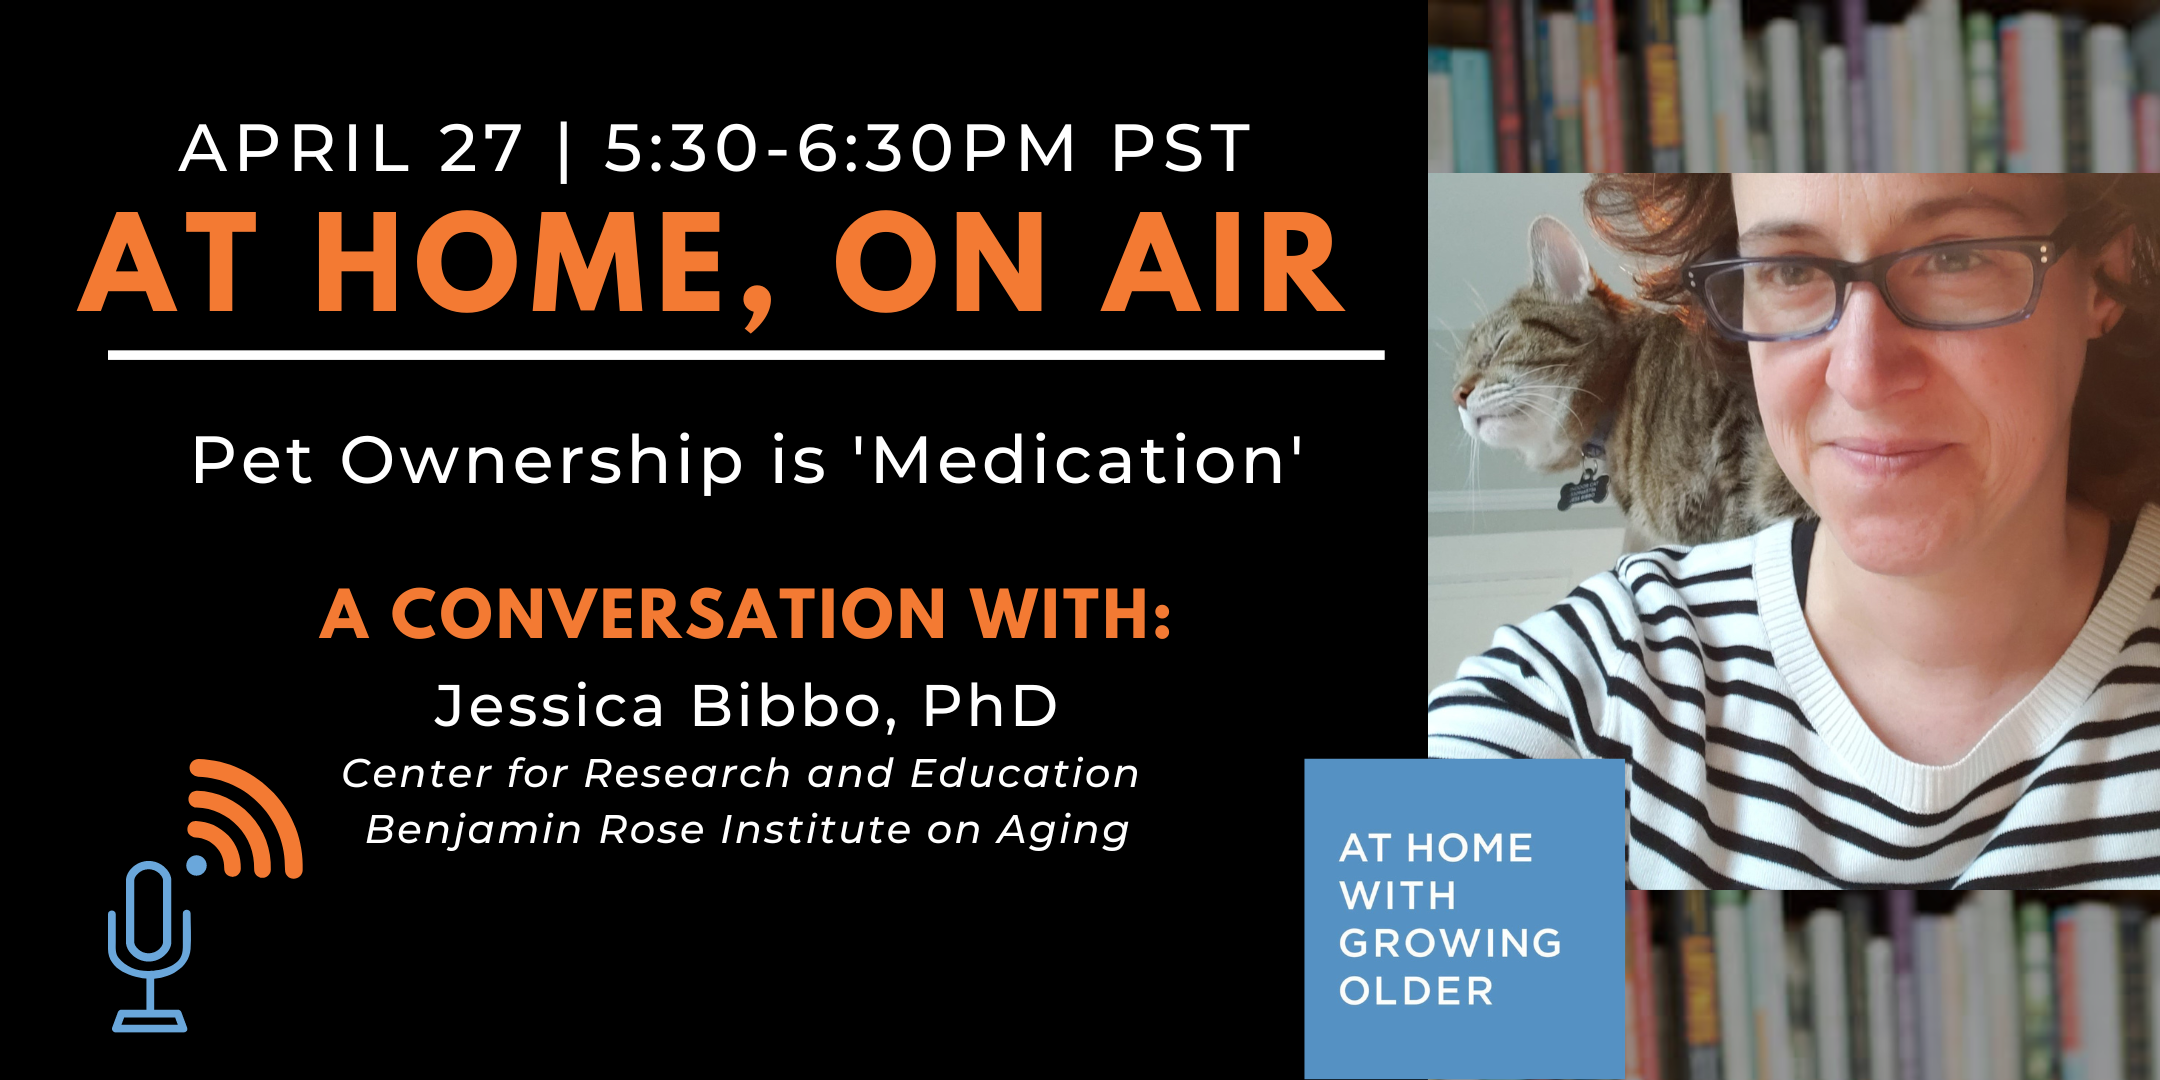 At Home, On Air: A Conversation with Jessica Bibbo, Ph.D.